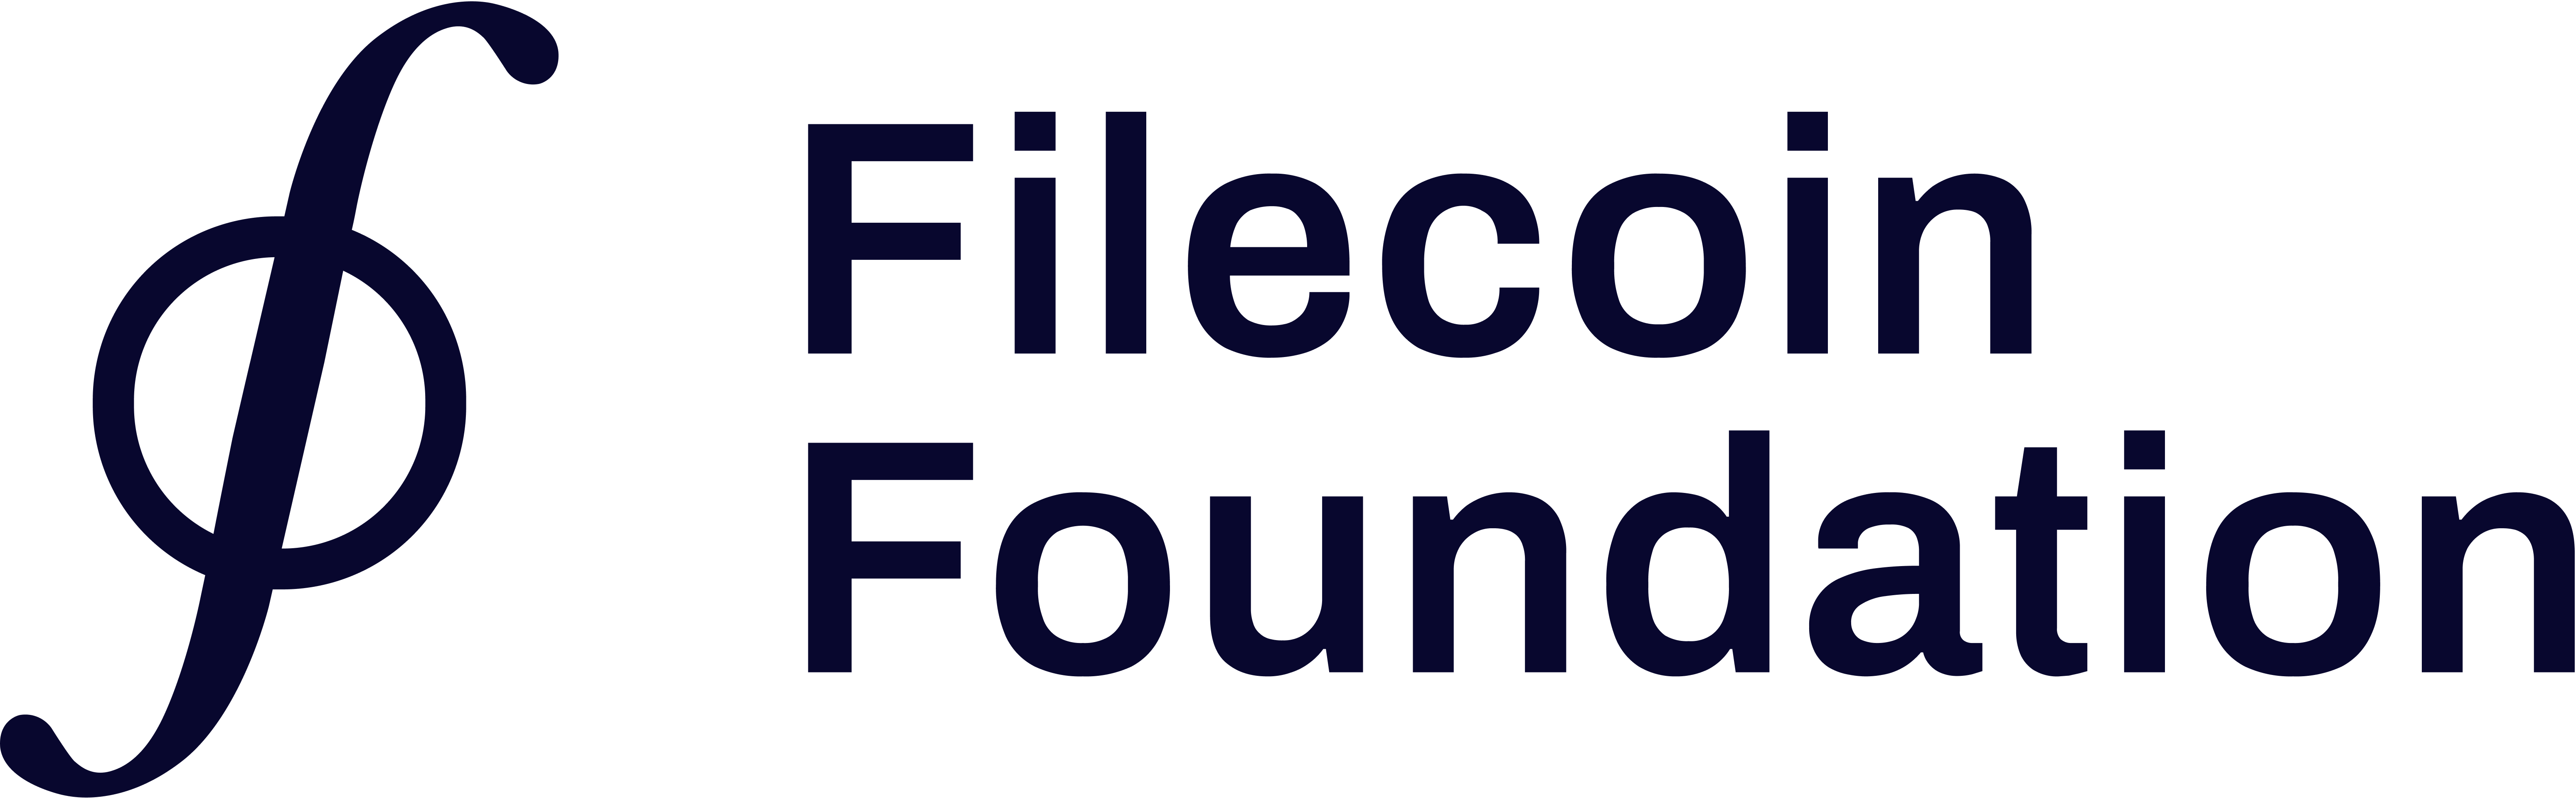 Logo of Filecoin Foundation for the Decentralized Web